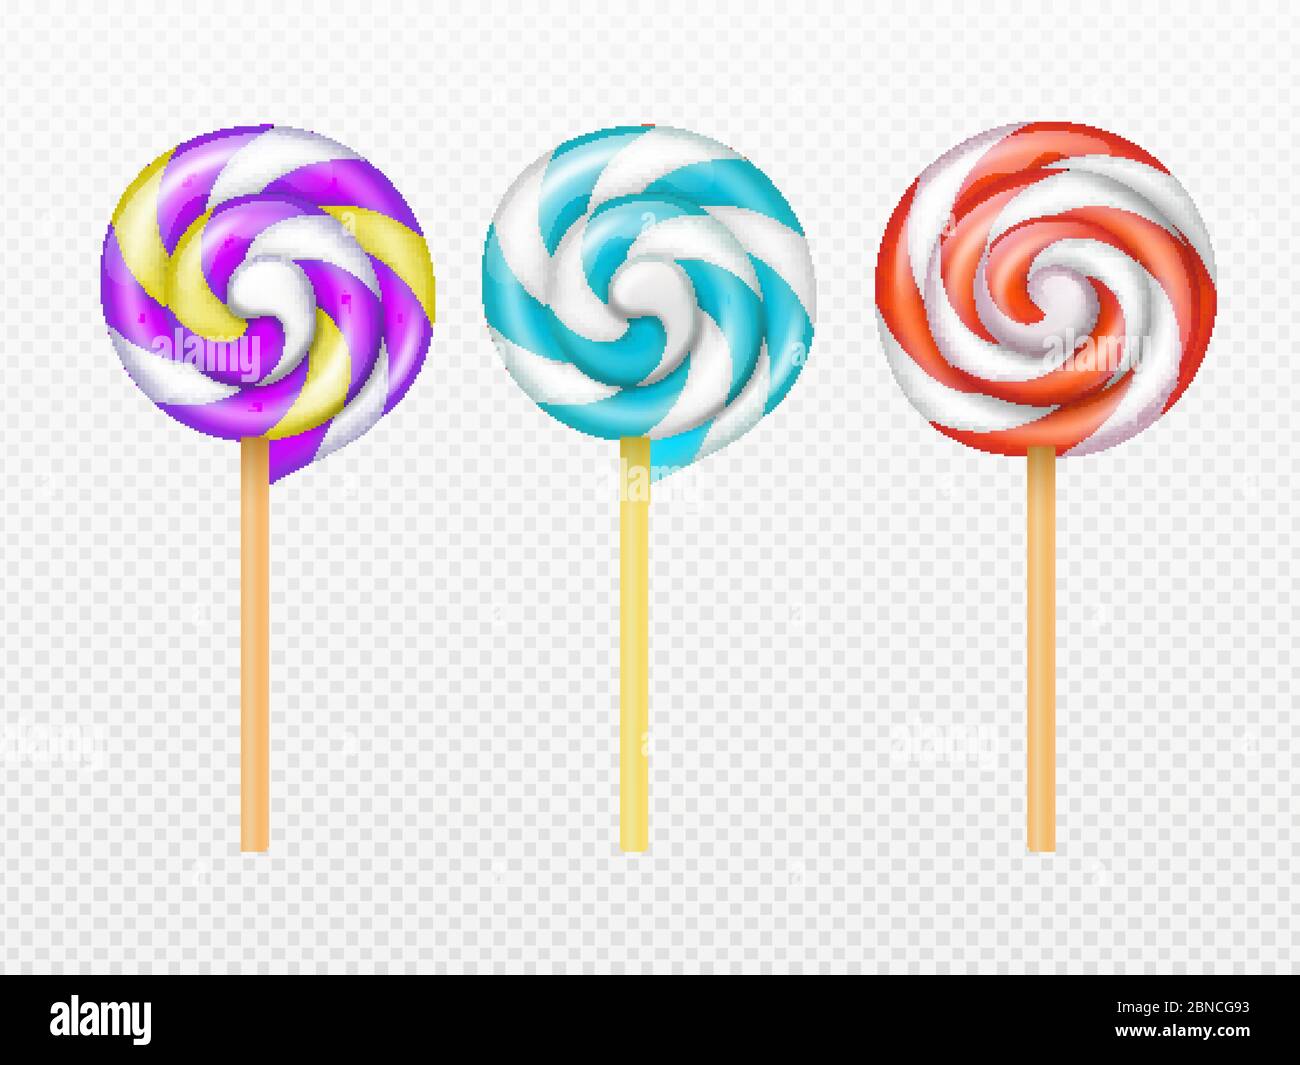 Realistic swirl lollipops vector isolated on white background. Illustration of lollipop and lolly caramel, yummy spirals swirl Stock Vector